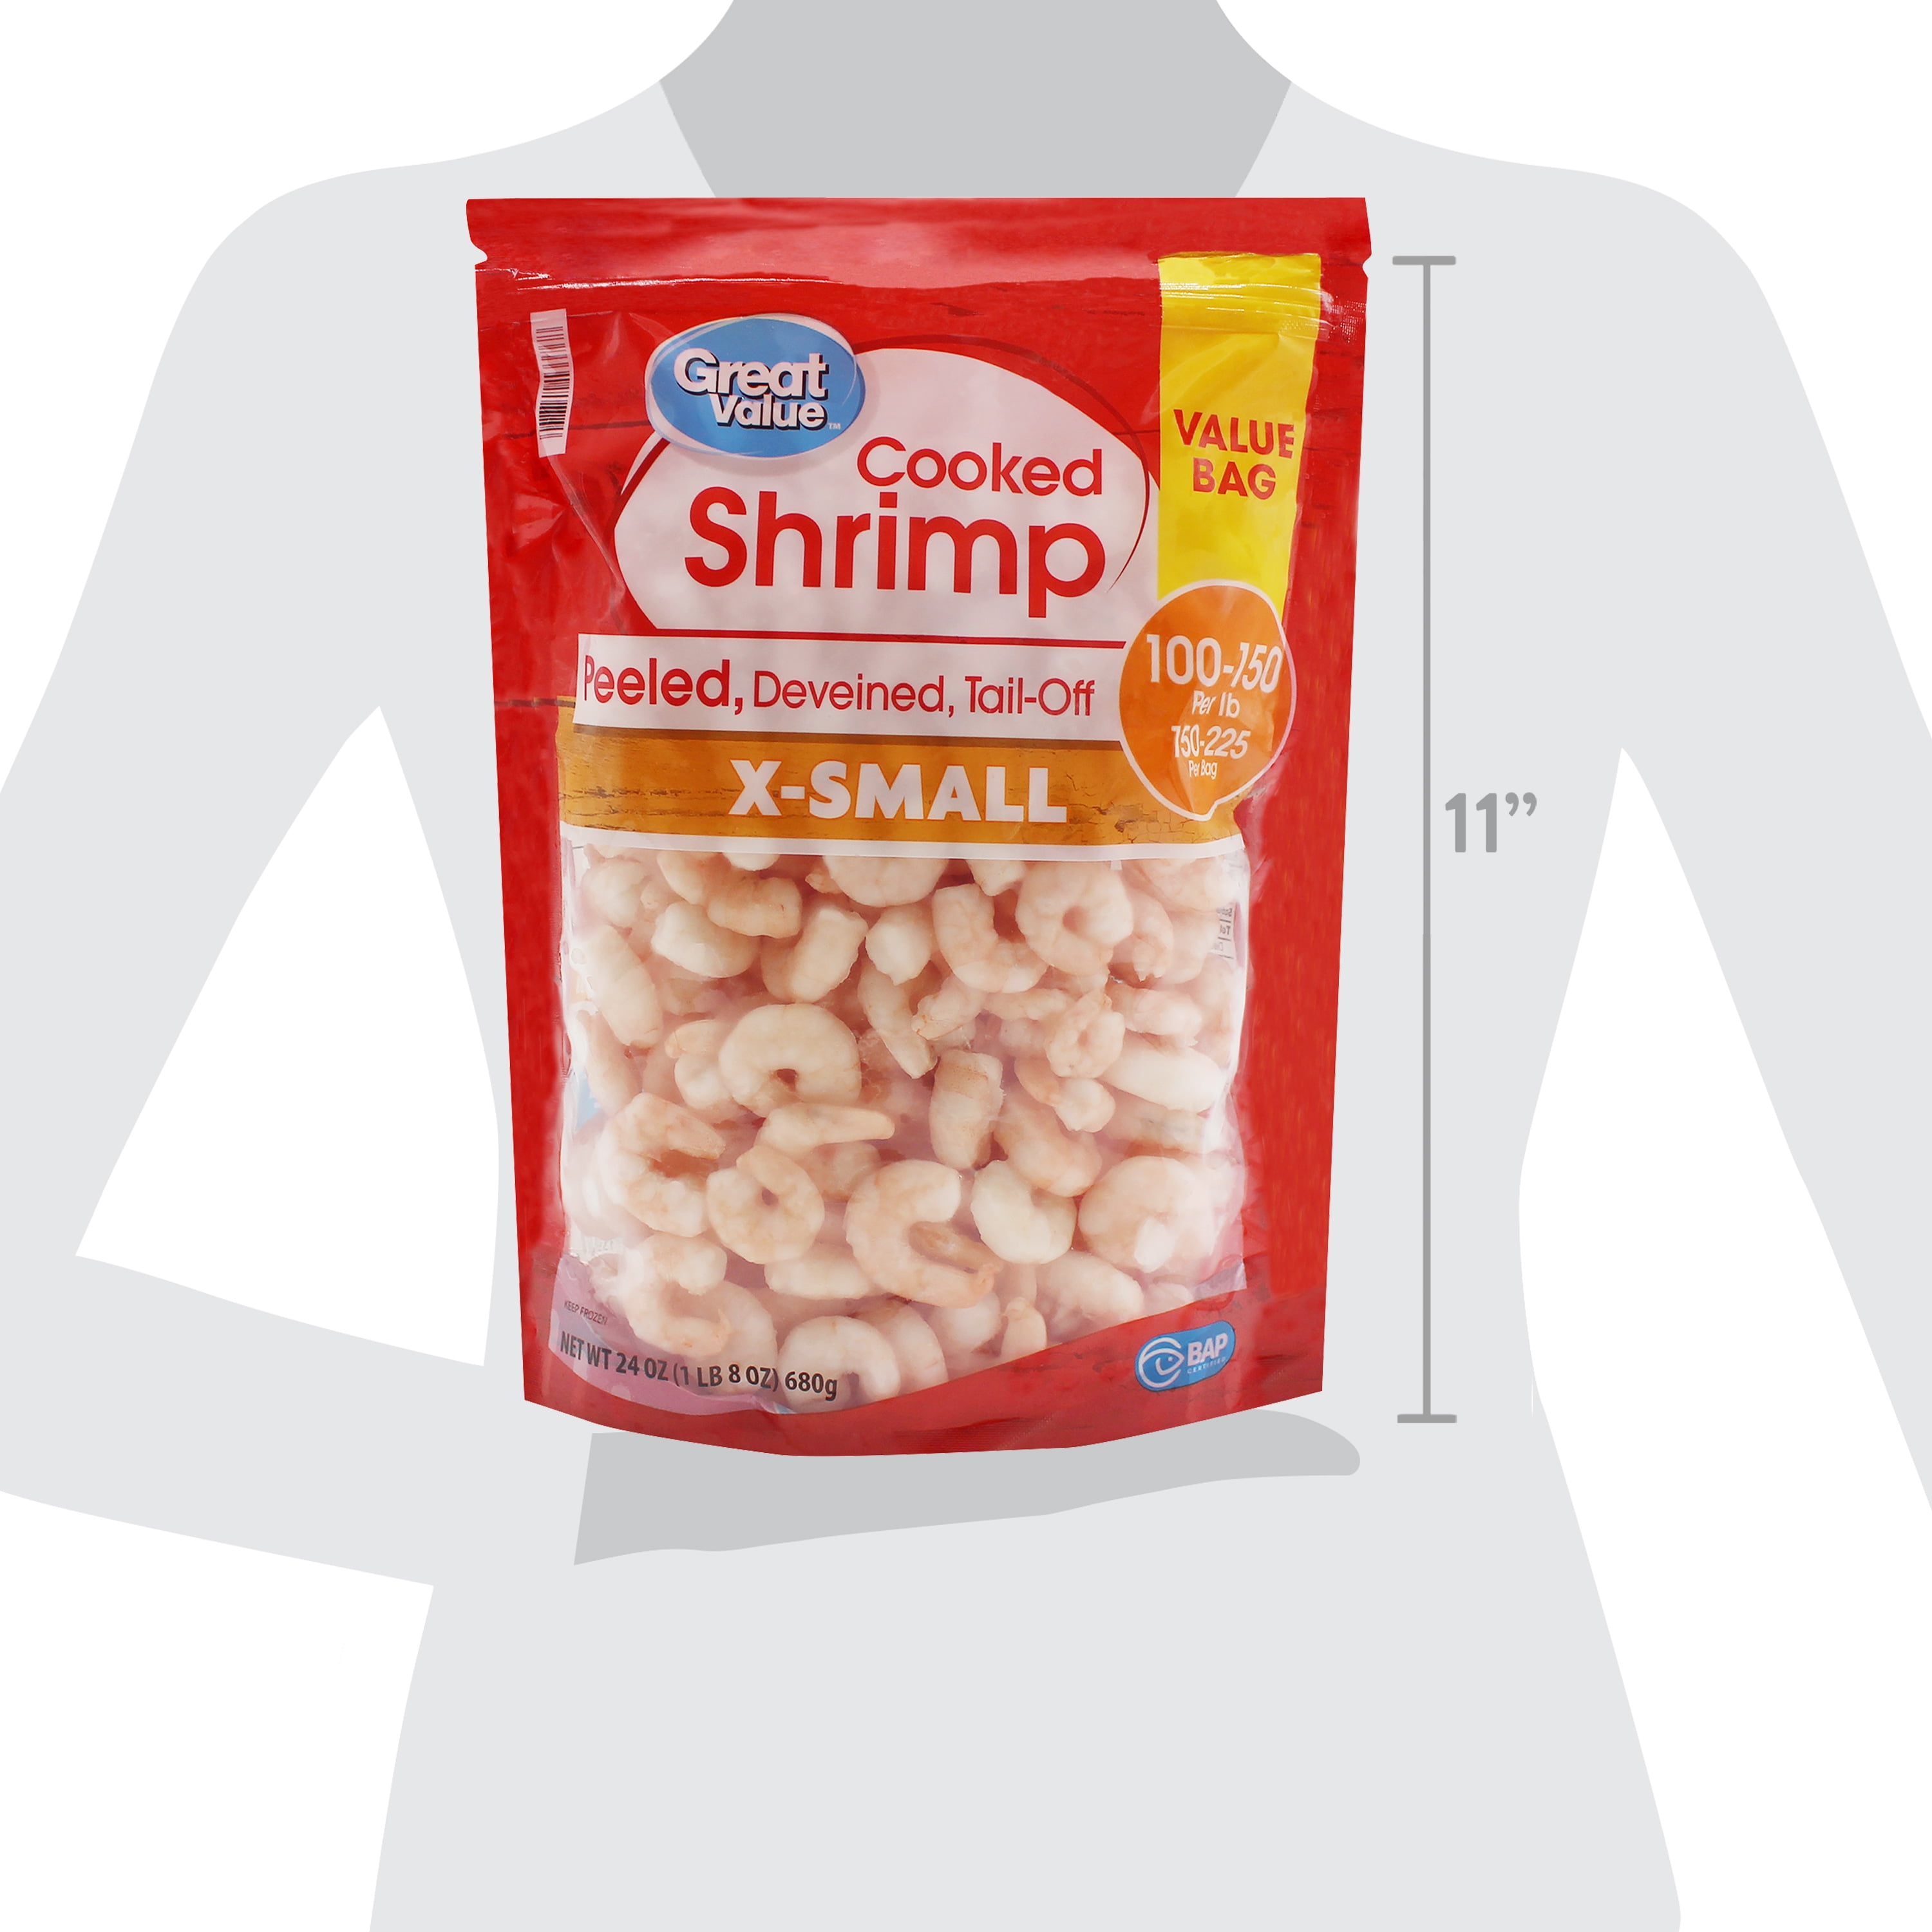 Shrimp Cooked Frozen Value Small (100-150 Peeled & per oz 24 Great Bag, Deveined, Value lb) Count Extra Tail-off